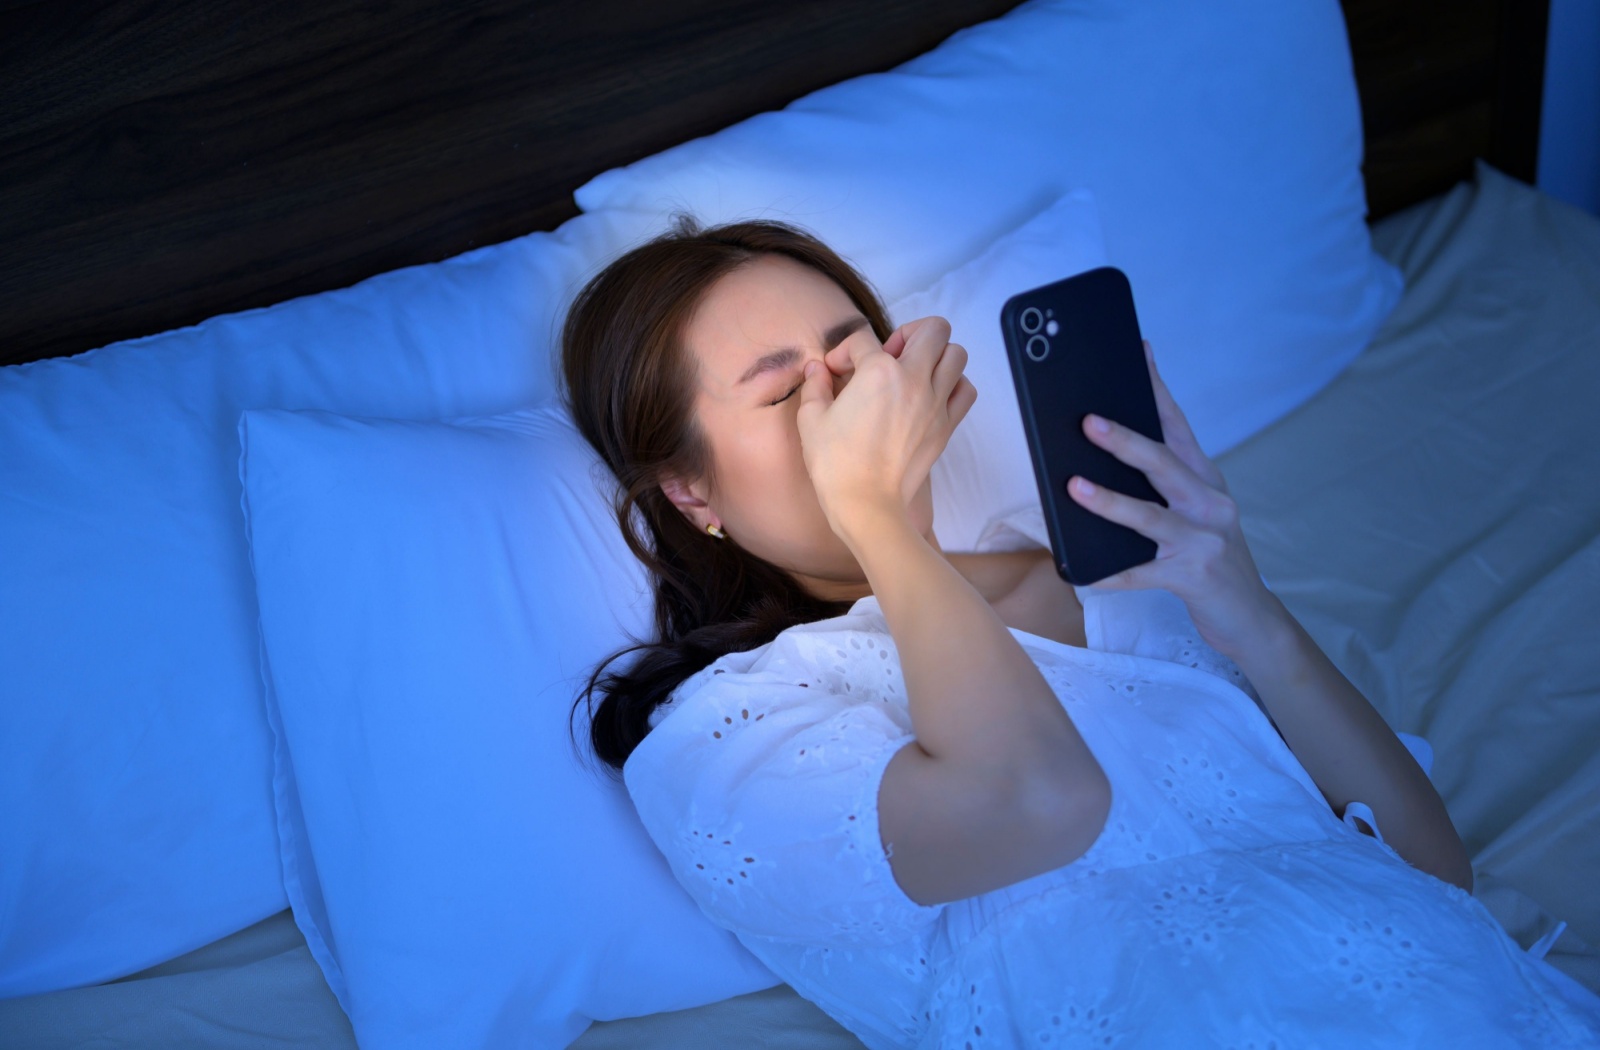 A woman places her fingers on her eyes due to discomfort from looking at her smartphone at night.